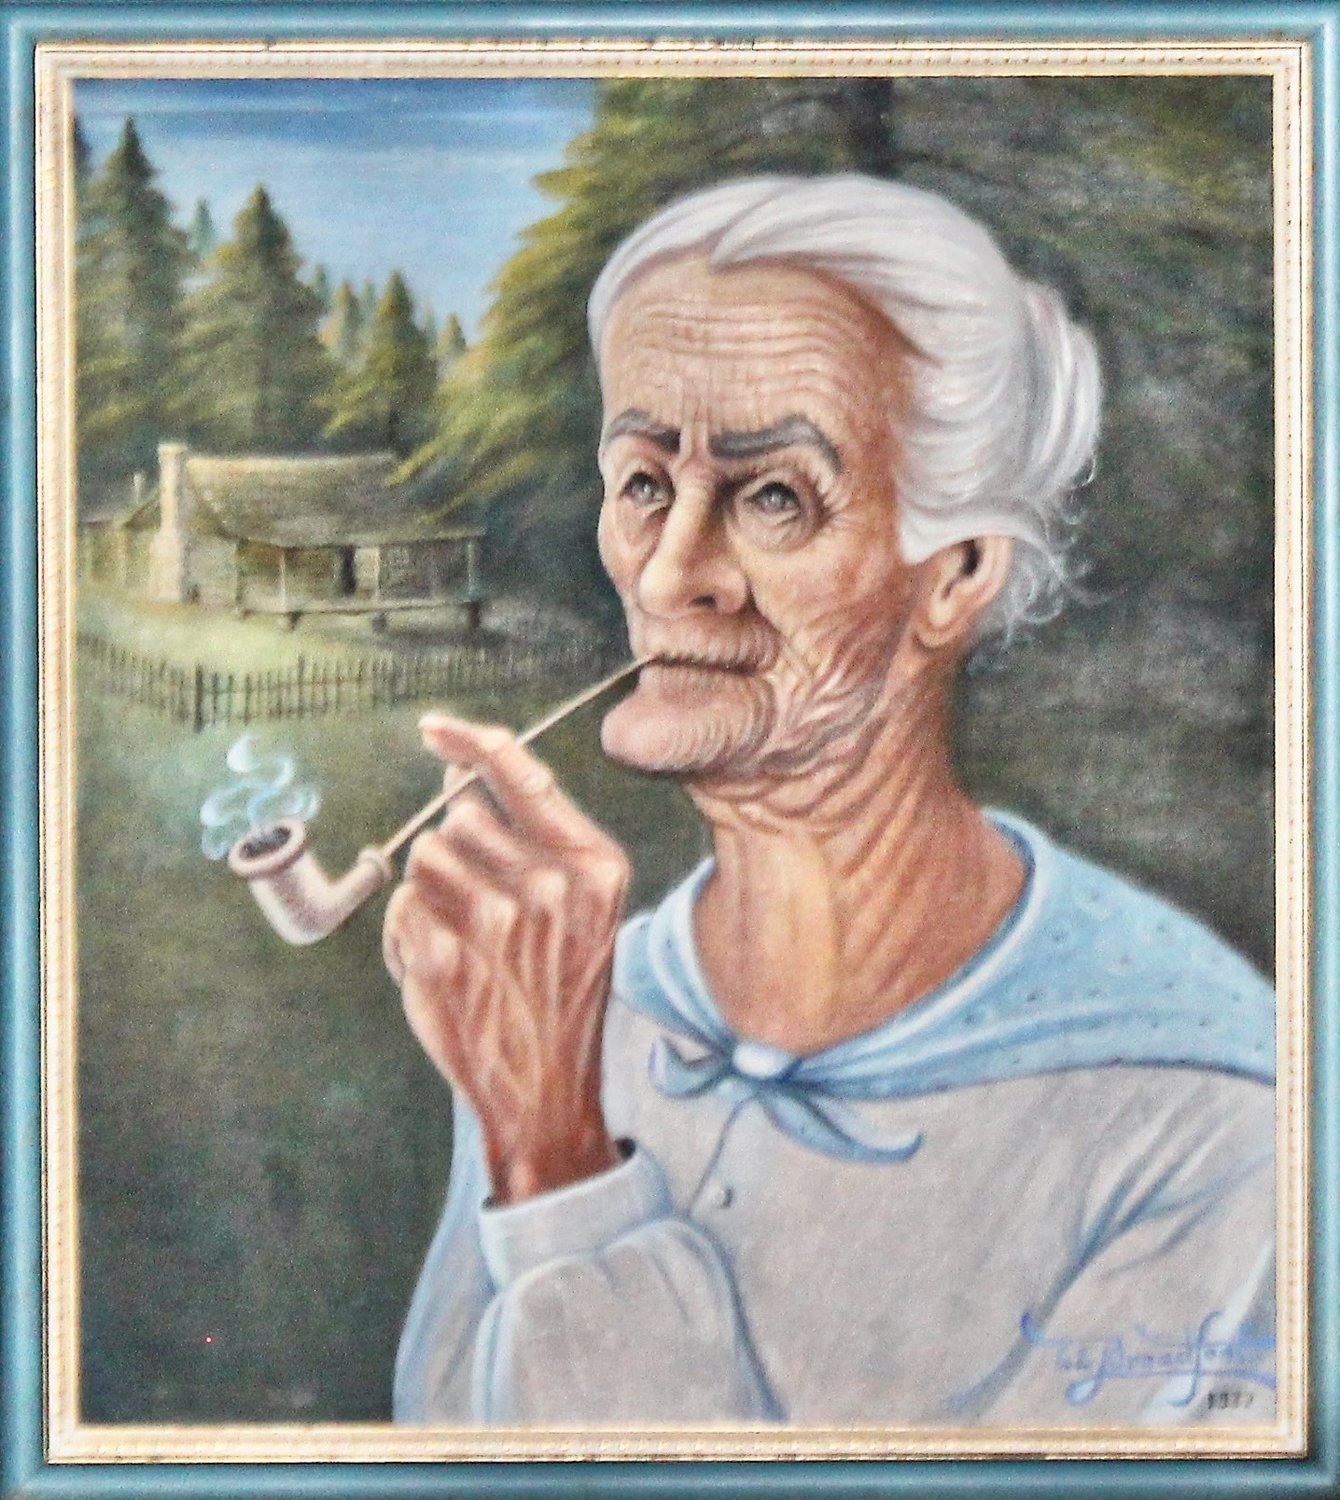 L.L. Broadfoot’s portrait of 111-year-old Katherine Burk is accompanied by a story describing the life of a woman who people suspected was a witch in the Ozark hills.